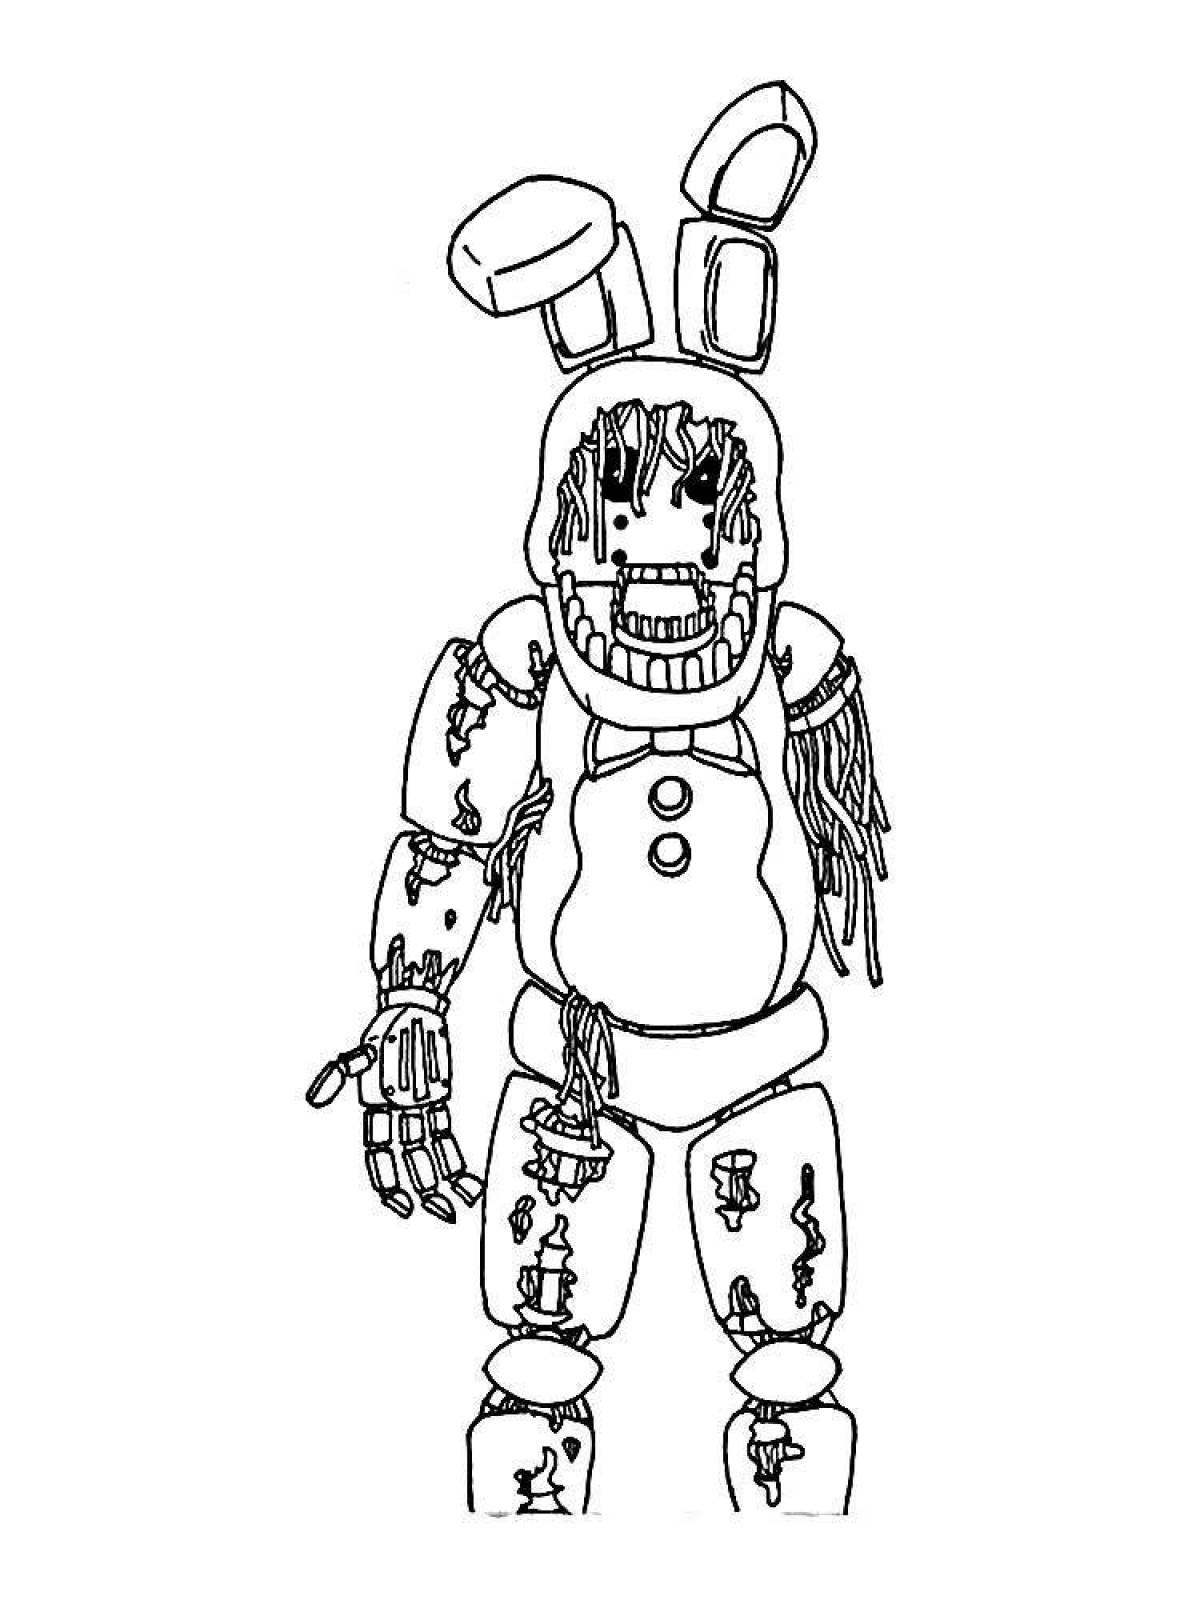 Exciting bonnie animatronic coloring book